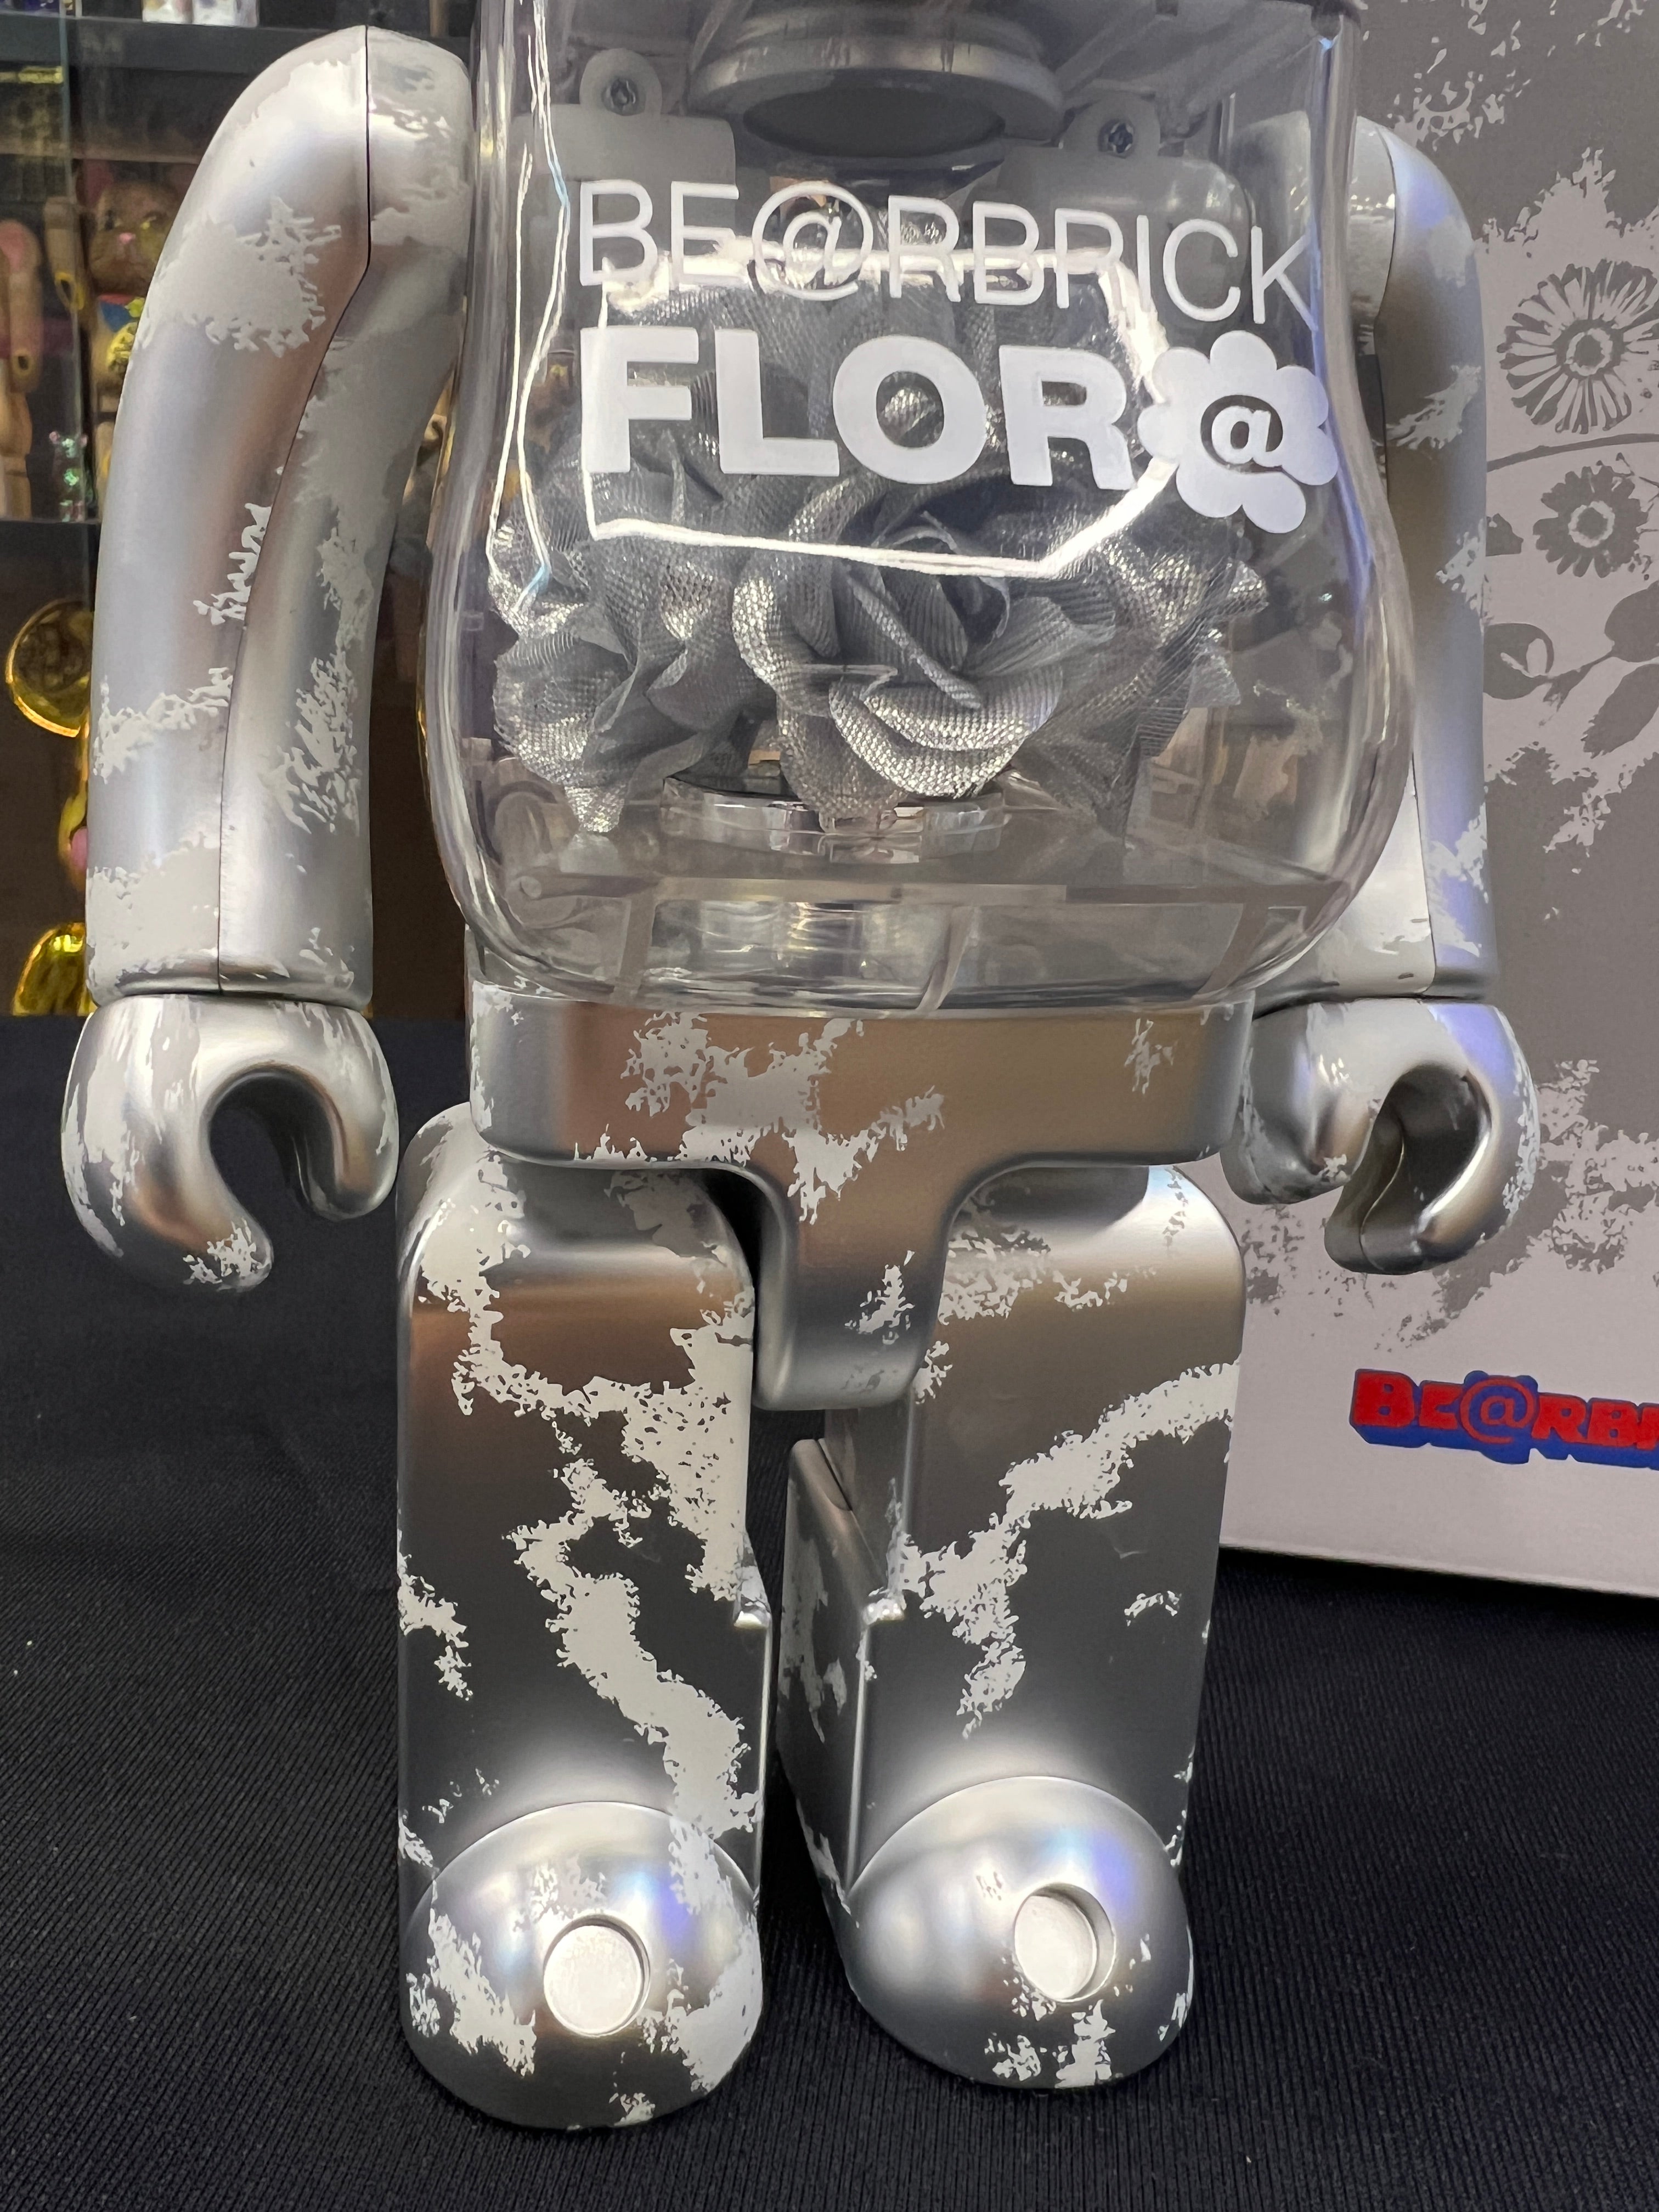 400% Be@rbrick Flor@ Silver – Madmaxtoys